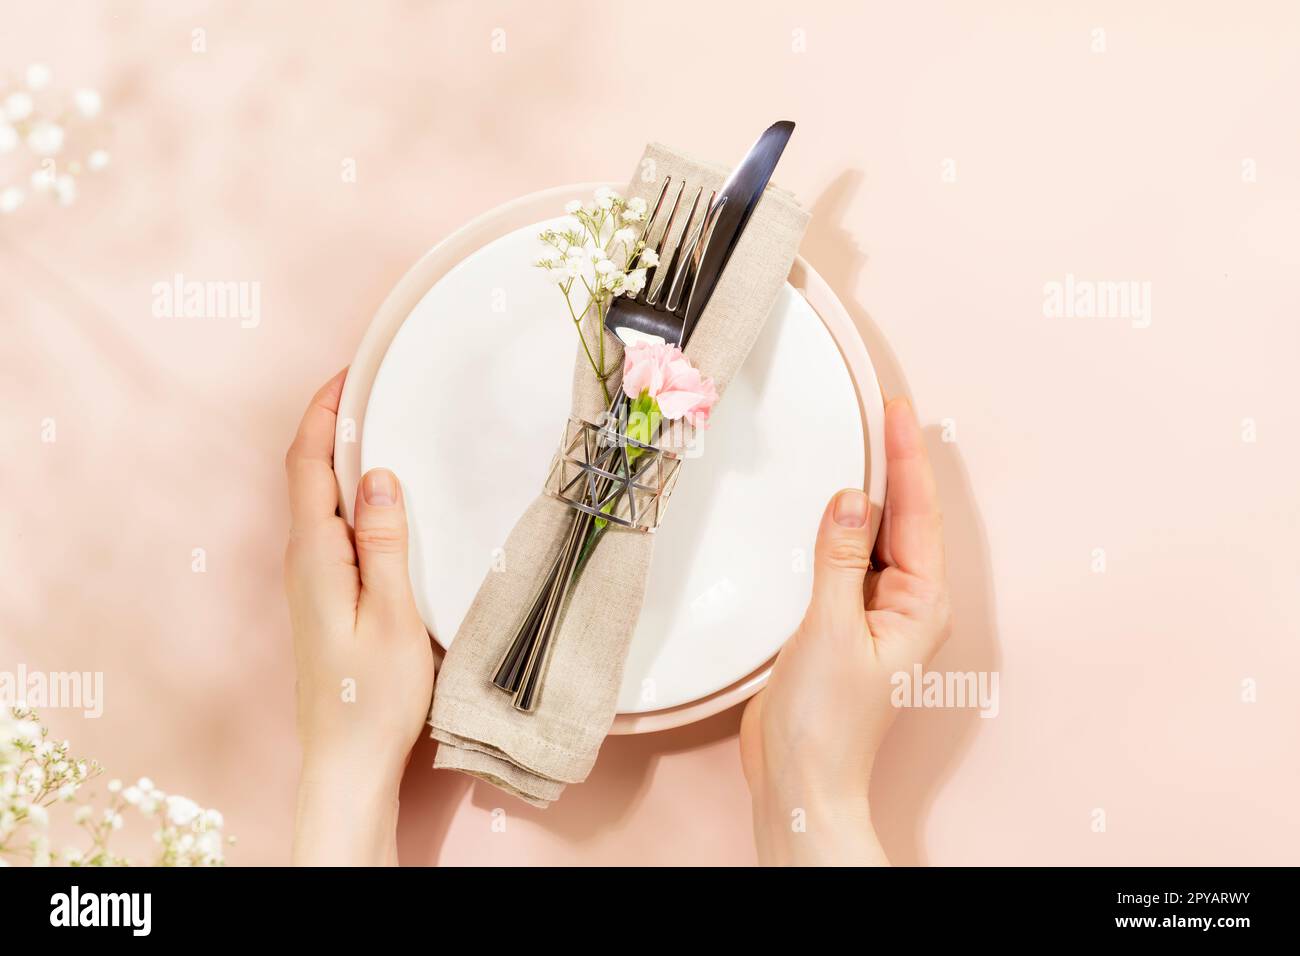 Female hands hold holiday dishes on light pink background with spring white flowers and shadows. Romantic holiday table settings. Flat lay Stock Photo